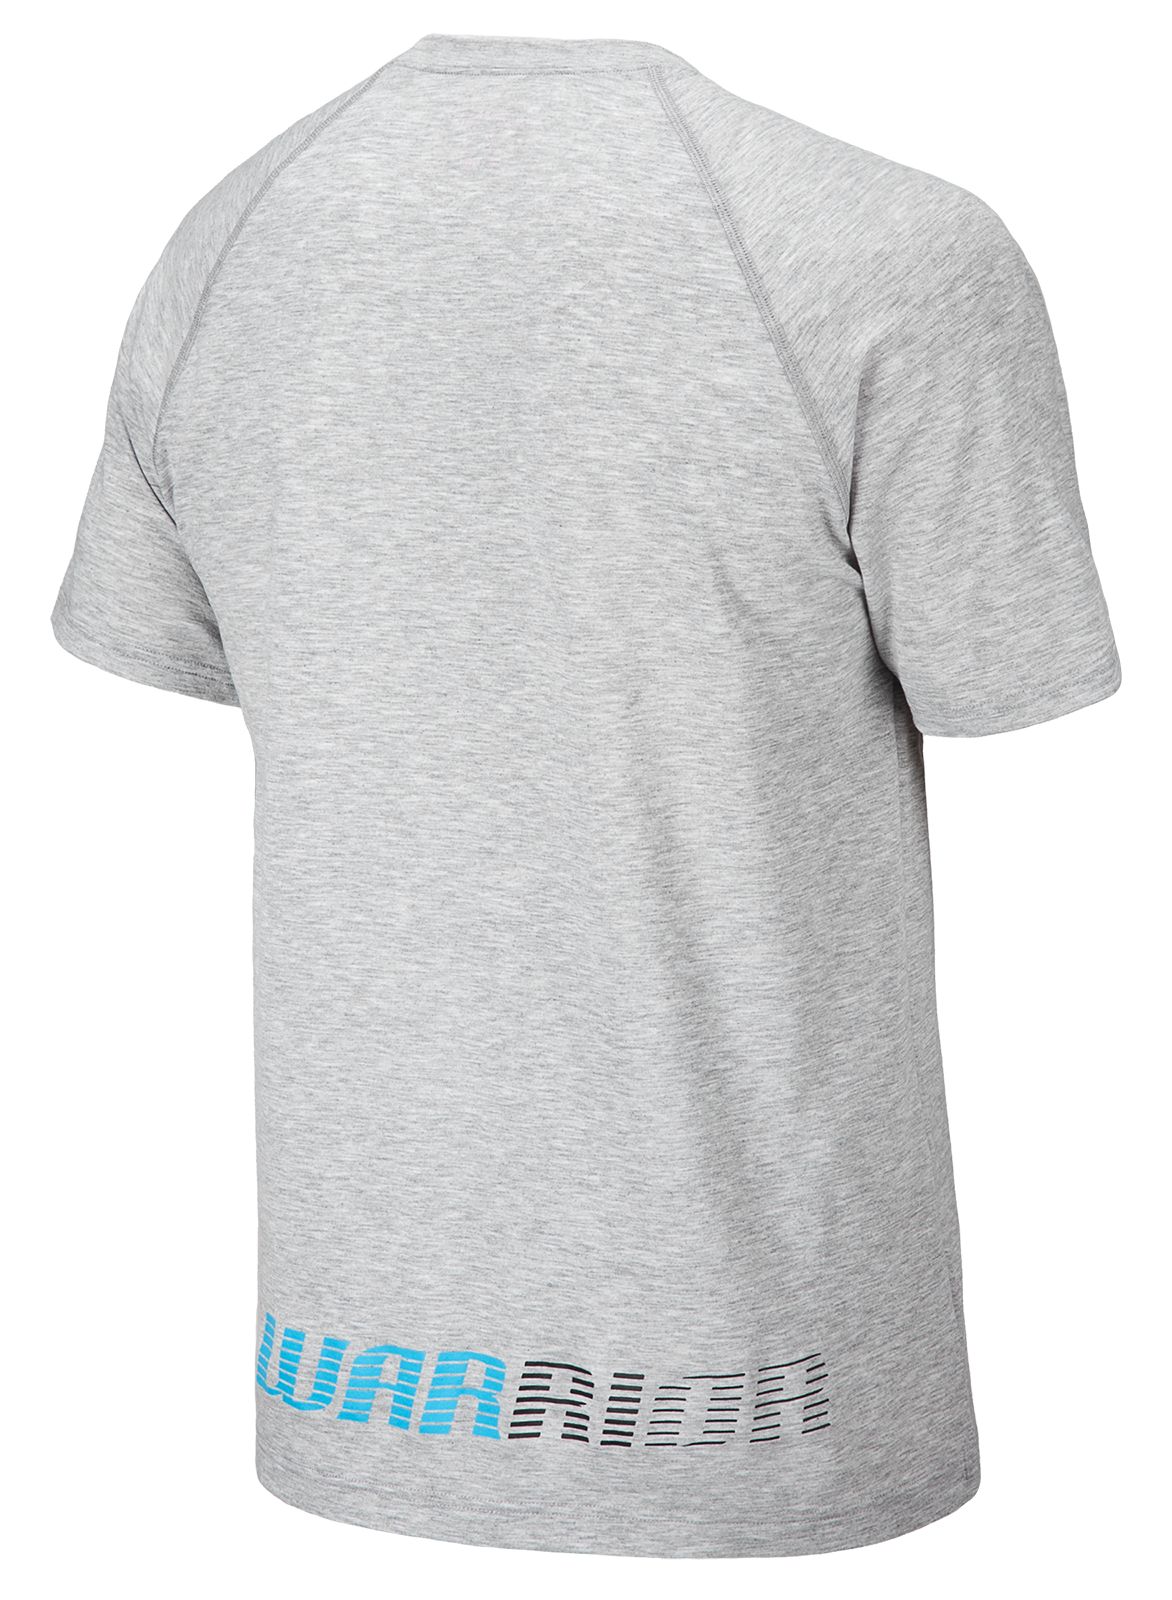 Playerz Tech Tee, Athletic Grey image number 0